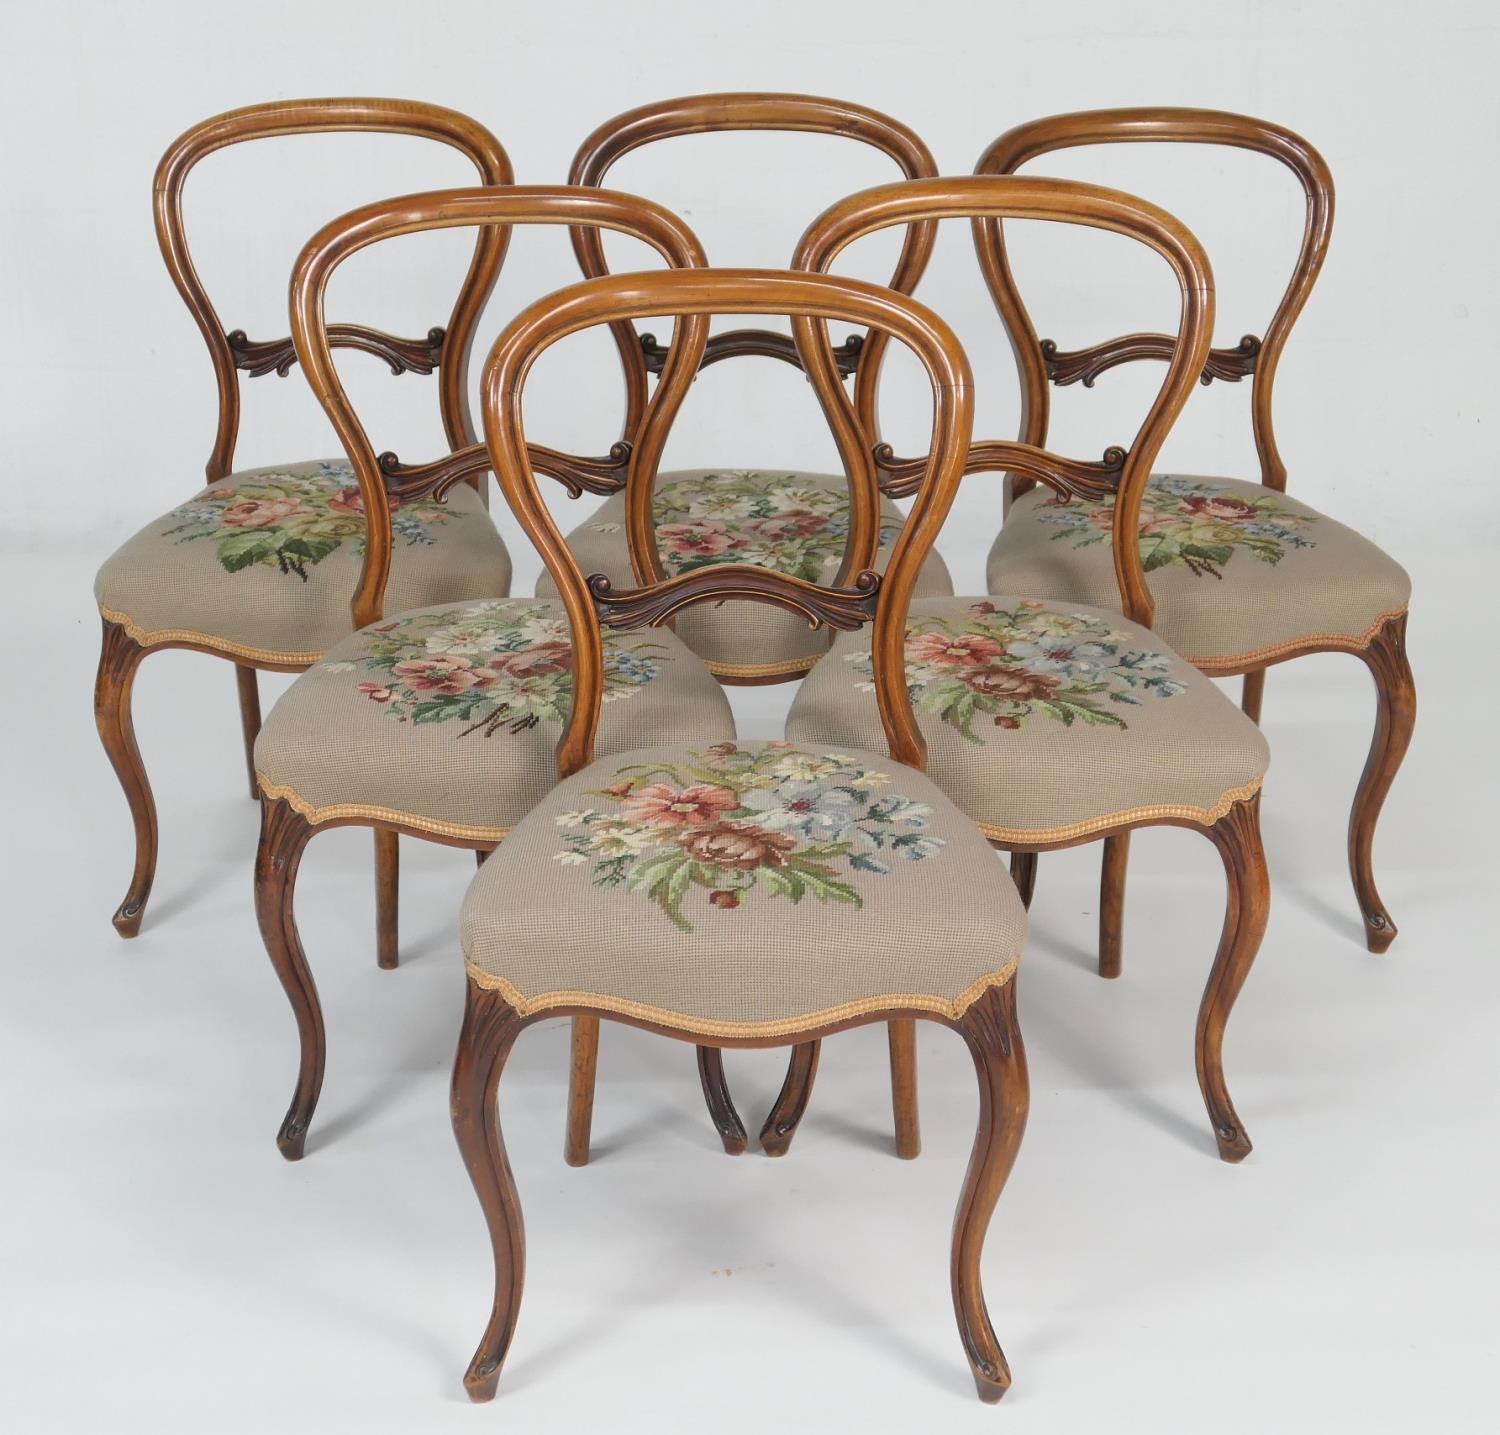 Set of six Victorian walnut balloon back dining chairs, circa 1860, with a carved central bar